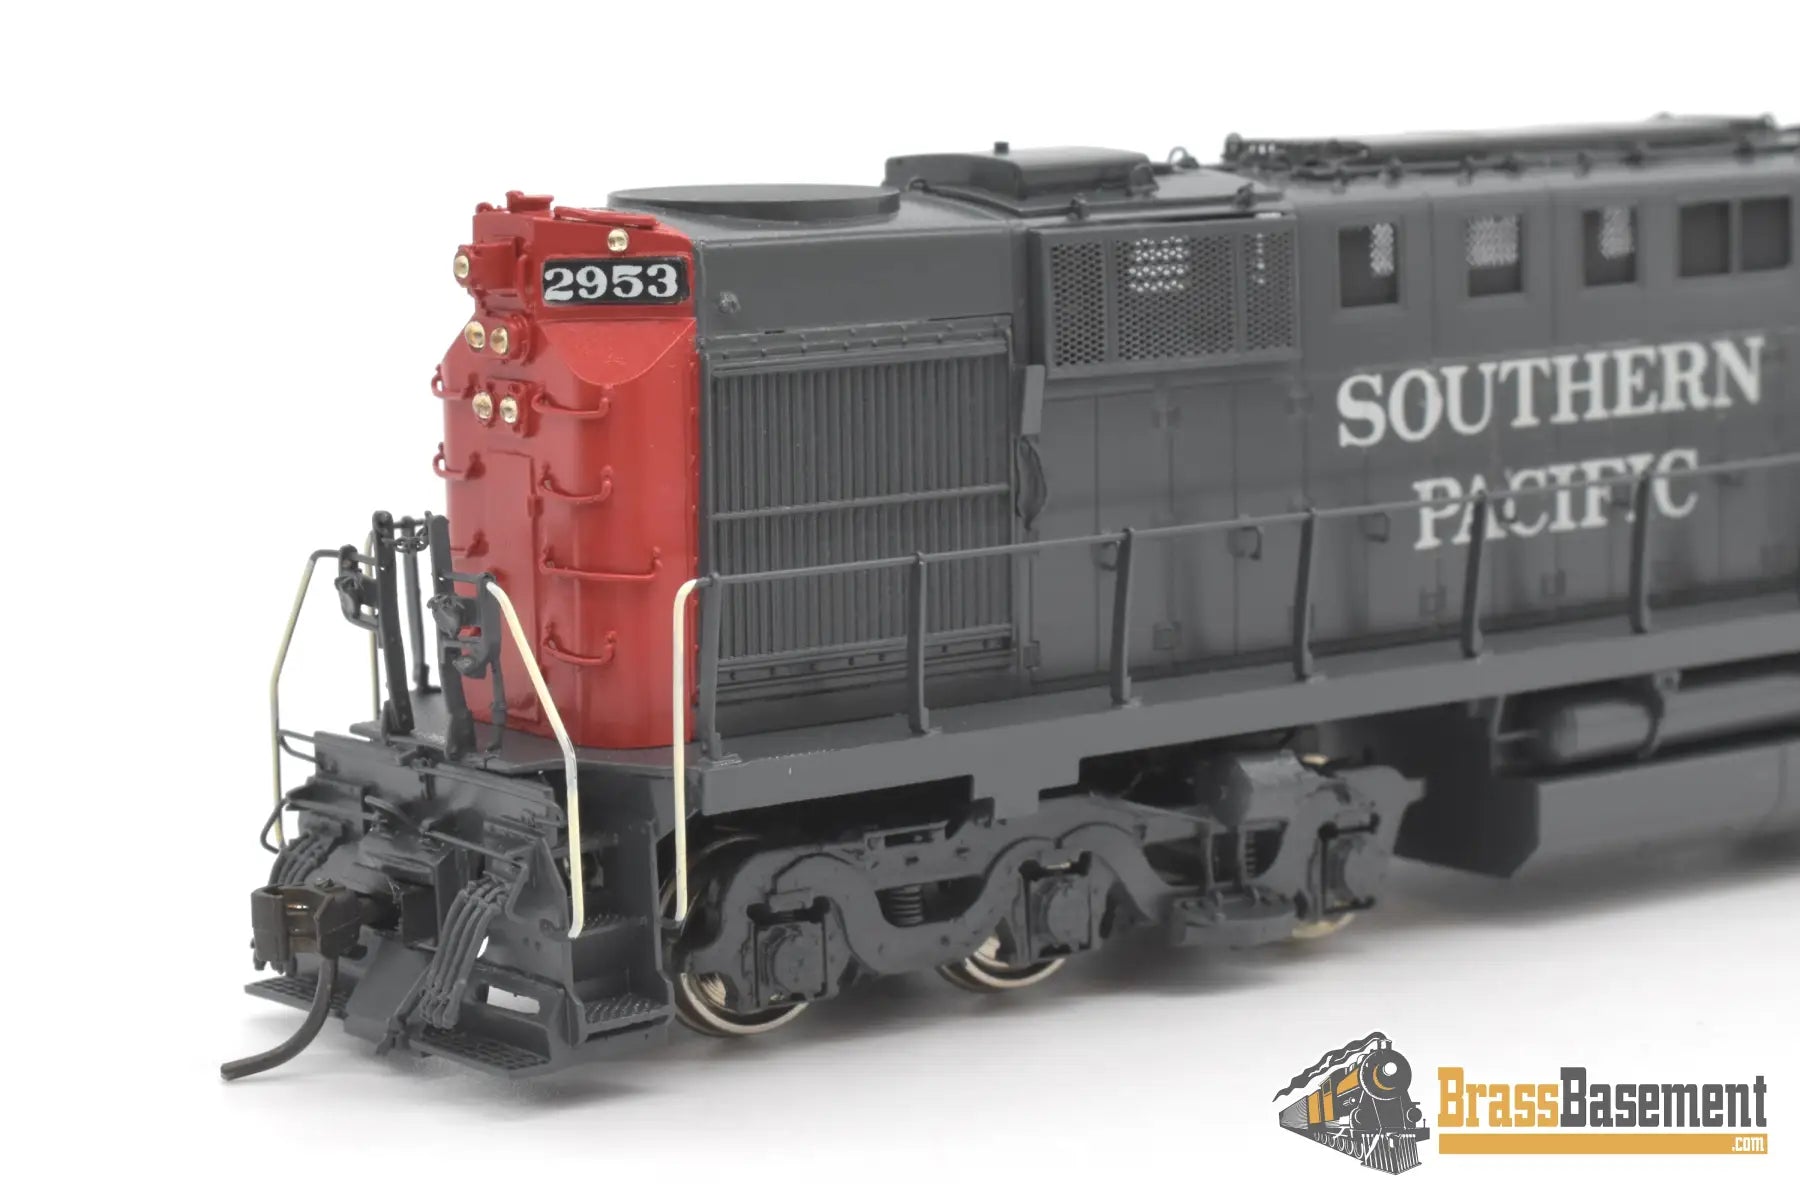 Ho Brass - Omi 5149.1 Southern Pacific Sp Rsd - 12 #2953 Low - Hood Cpomi Diesel